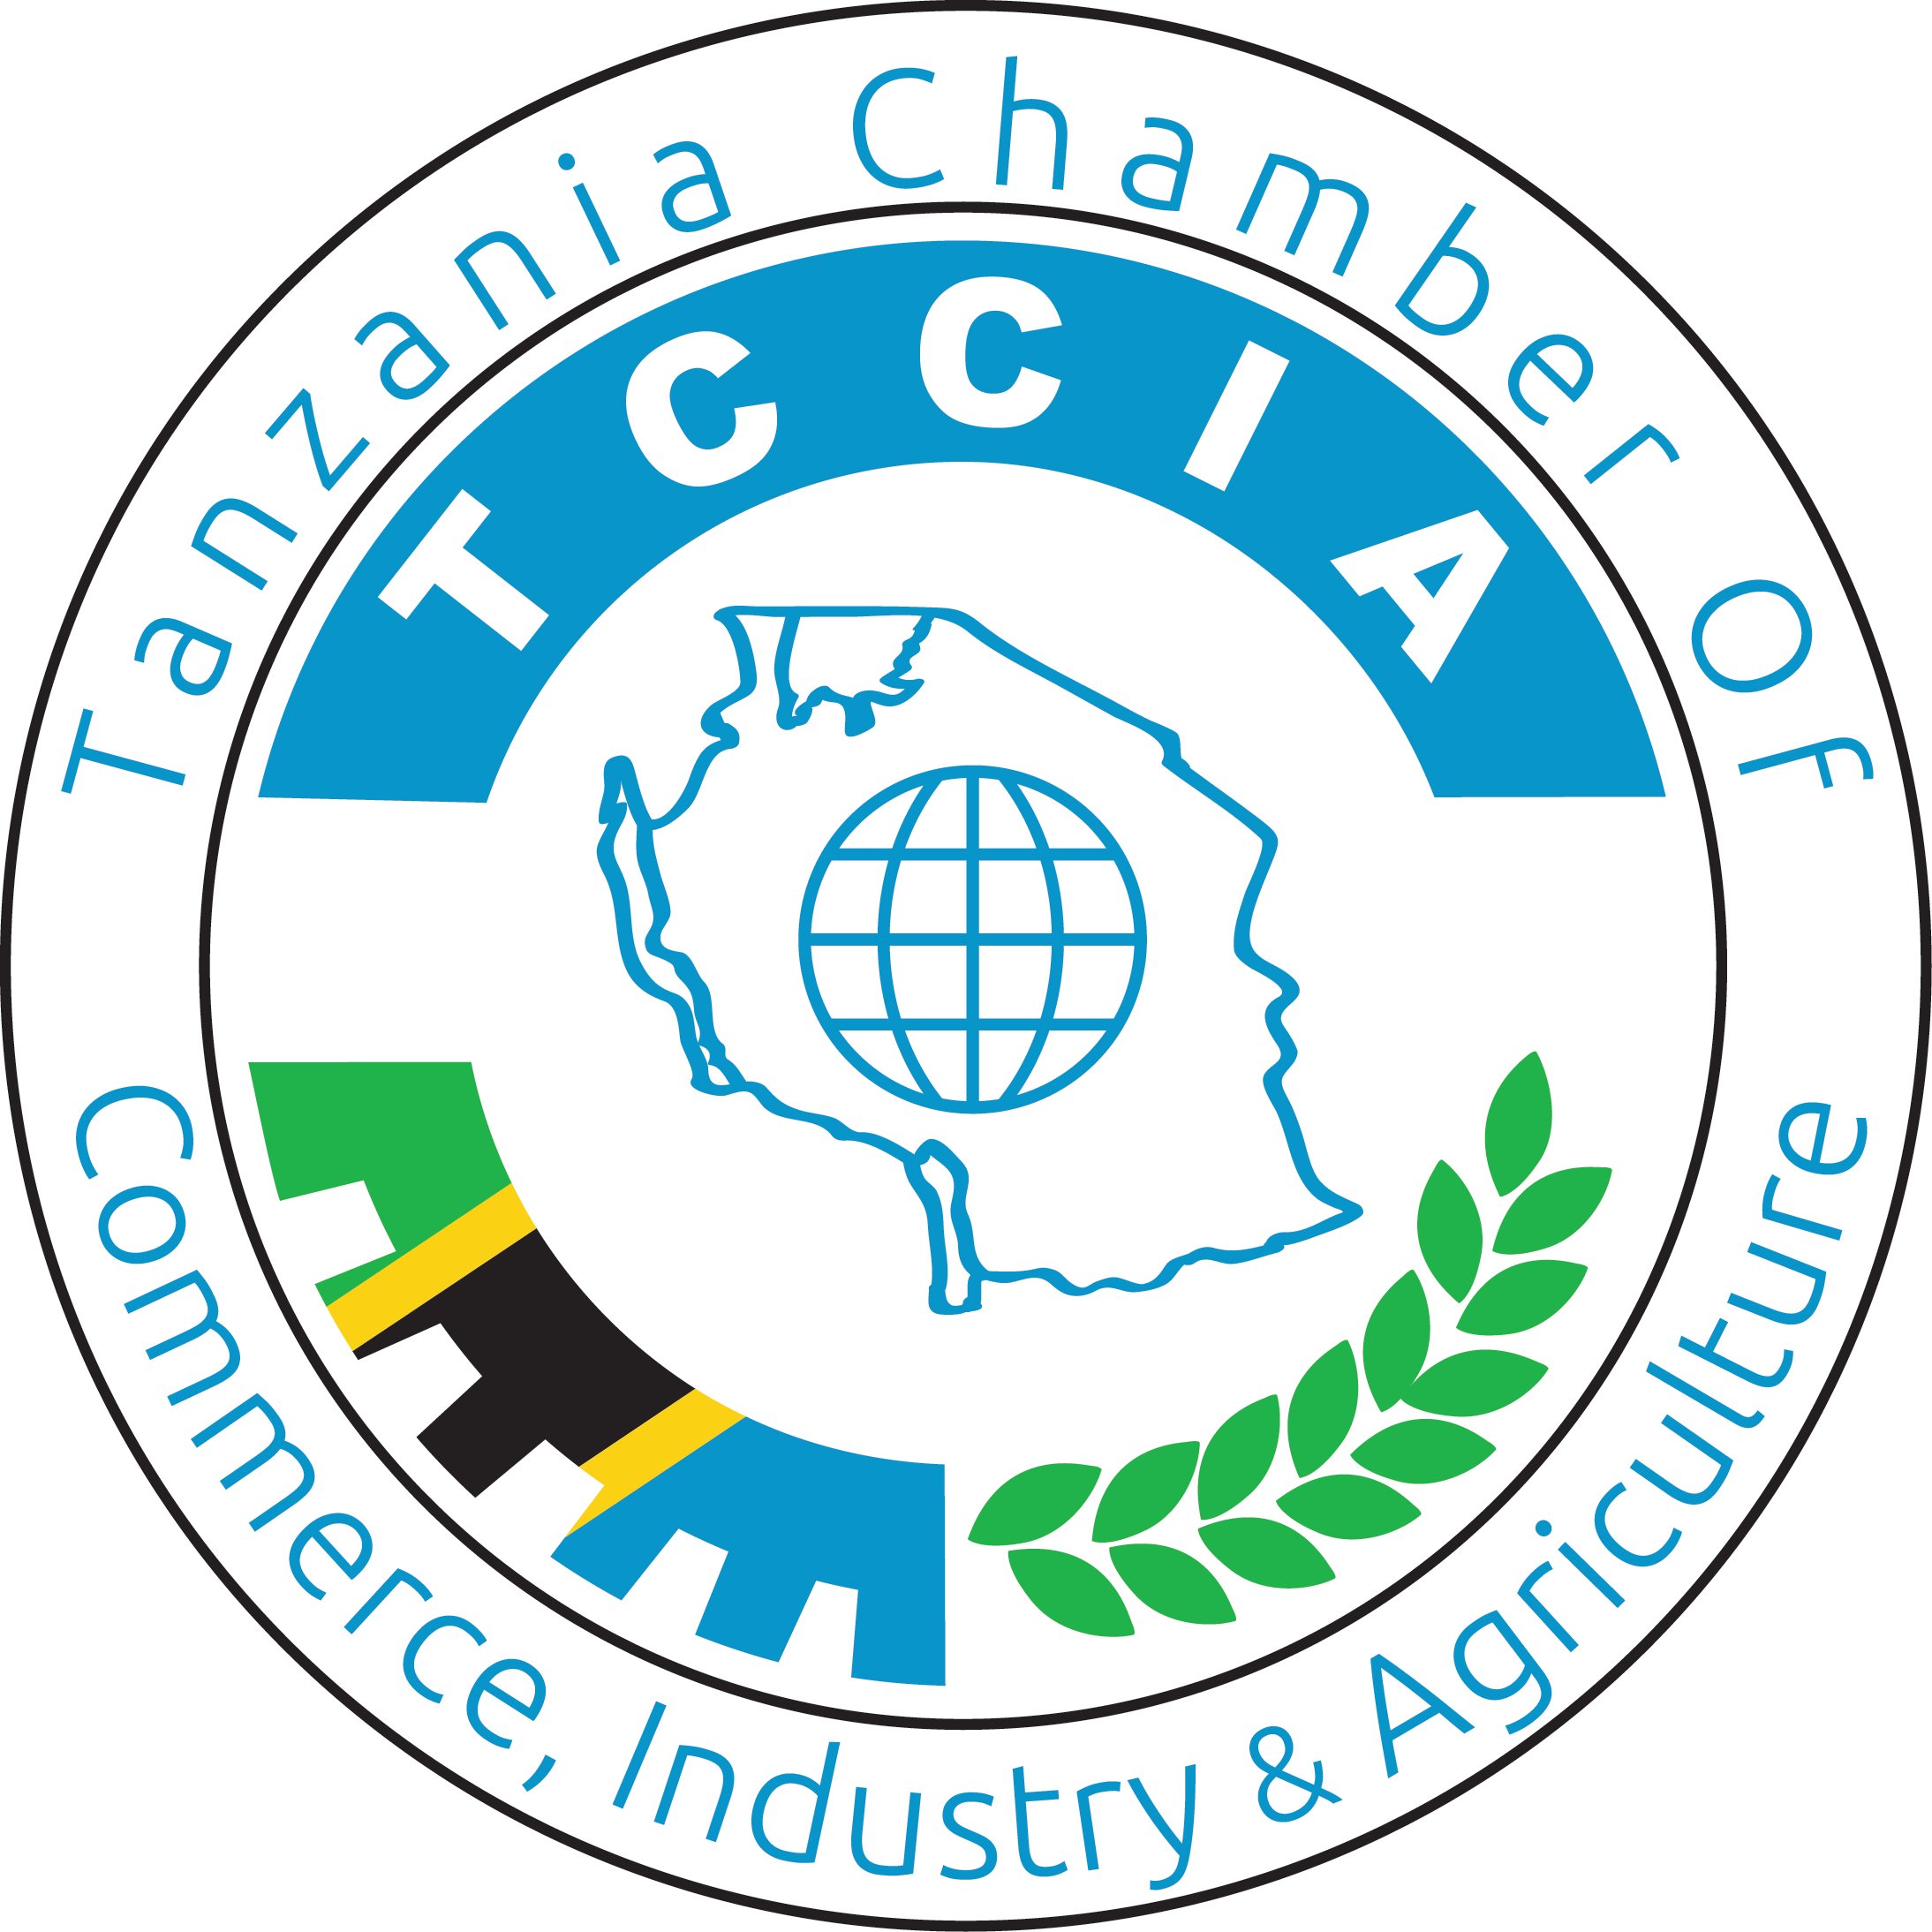 Tanzania Chamber of Commerce, Industry and Agriculture logo